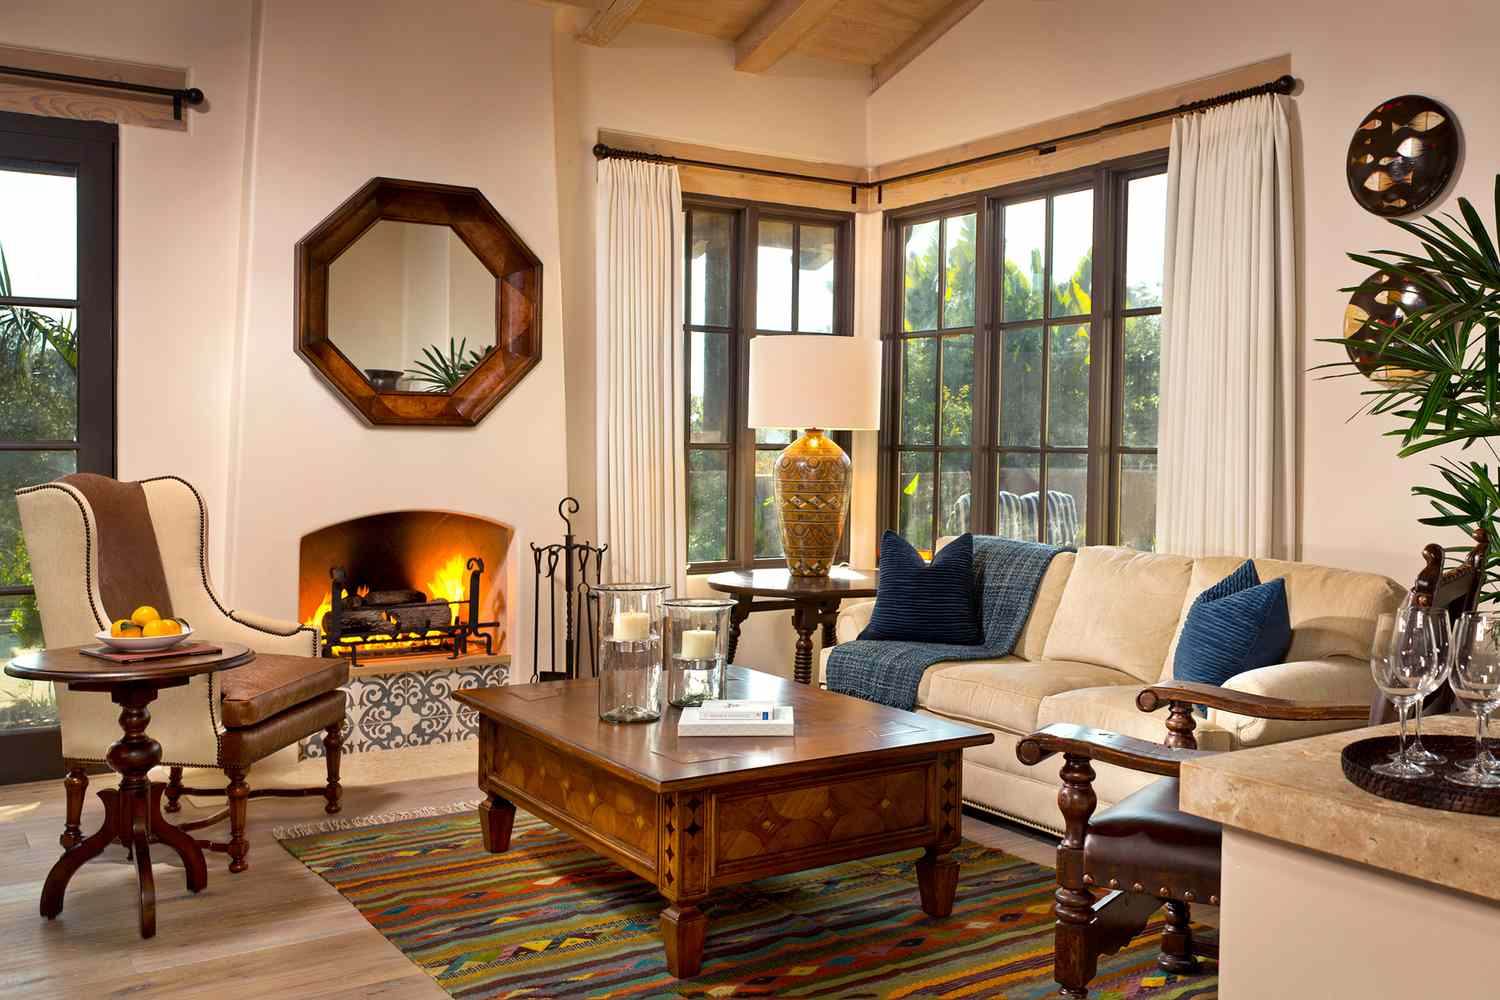 Fireplace in living room at Rancho Valencia Resort & Spa